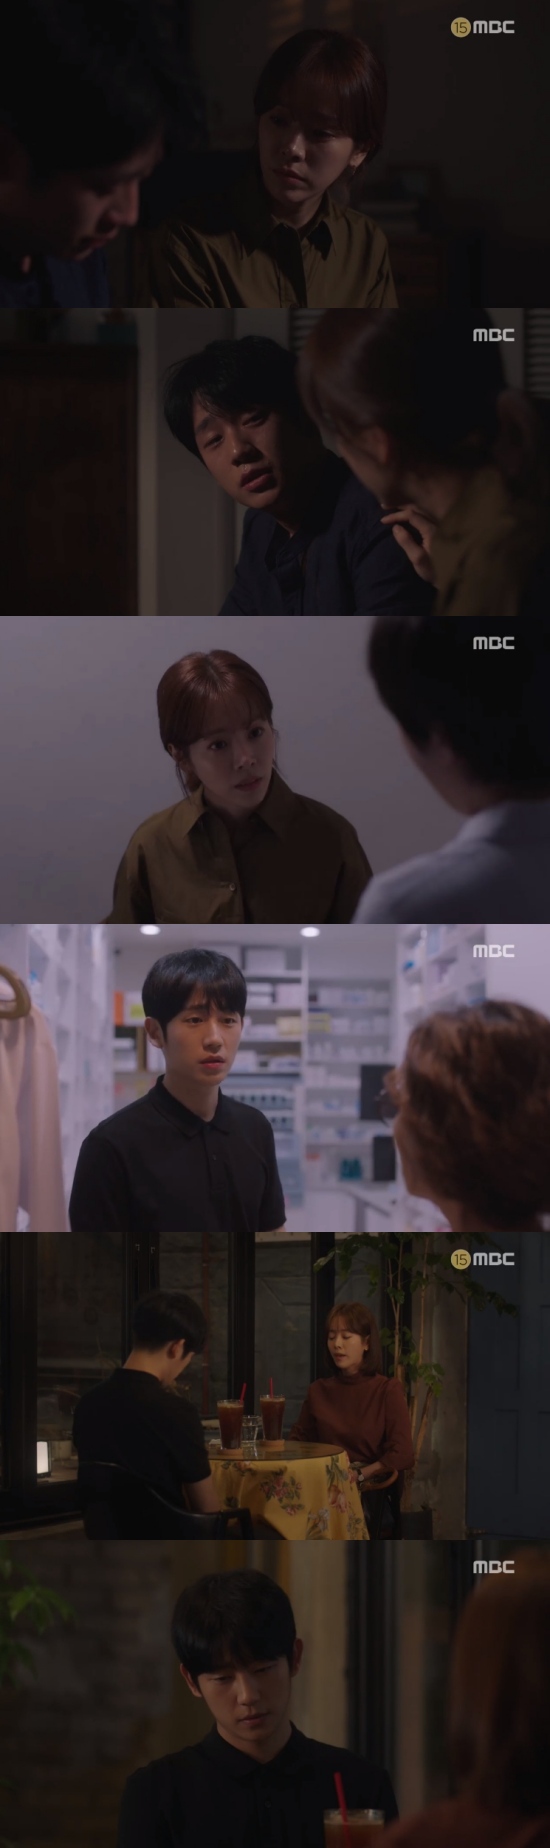 Spring Night Jung Hae-in and Han Ji-min once again confirmed each others hearts.In the 29th and 30th MBC drama Spring Night broadcasted on the 10th, Yoo JiHo (Jeong Hae-in) and Lee Choi Jung-in (Han Ji-min) were reconciled.On this day, Yoo JiHo was drunk and cried, Choi Jung-in will throw us away? If you will, its okay now.Lee Choi Jung-in said, What do you mean? Whats this about. You dont believe me now?I asked him, Im asking you if you can believe it. The embarrassed Choi Jung-in said, Do you think Ill change?I dont know. I dont know. I cant answer. I see.The next evening, Choi Jung-in called Yoo JiHo to the cafe, where Yoo JiHo said, Im so sorry, but I never thought about it for a second.I am embarrassed to move to my mouth, said Choi Jung-in, I have never imagined it, but I asked if I would throw it away.Choi Jung-in is going to abandon us? I said. I was honestly feeling like, Isnt this Choi Jung-in the same thing?Yoo JiHo said, I honestly do not have a memory that is so frustrating now, so I can not even apologize, excuse or refutation.Im afraid Ill make more misunderstandings. If I dont want to do that because of my past, as Mr. Choi Jung-in said, I cant be disqualified.So I just had anxiety in me that I did not know. Its just that. Lee Choi Jung-in said, I betrayed the person I met and I showed it to Mr. JiHo. Like Mr. JiHo, I am qualified.I know you dont believe me at all. I feel uncomfortable even though I know it. Yoo JiHo said, I am the one who pushed this Choi Jung-in because he was so bad.The woman who thought so made the hard effort to come to me, but it makes sense that I doubted her mind. But Lee Jung-in said, Im not JiHo. I doubt you. I love you. I thought you could love me like this.But Mr. JiHos past is so rough. So I know. Im still short. I think I need more time to think about myself.I do not want to understand this, but I am sorry, Yoo JiHo said, I will tell you exactly what I am.Dont throw us away, he said.Eventually, Yoo JiHo and Choi Jung-in did not contact each other.At this time, Choi Hyun-soo (Im Hyun-soo) called Yoo JiHo, and Kwon Ki-seok (Kim Jun-han) tipped off that he knew the situation between Yoo JiHo and Lee Jung-in.Choi Hyun-soo said, What is Choi Jung-in? Did you already tell him? You want to be back with your brother? Yoo JiHo ran to Kwon Ki-seok with anger.Yoo JiHo said, We talked. Dont touch this Choi Jung-in. I thought you said you were a senior.If I give up, will I meet Choi Jung-in again? Kwon Ki-seok said, Who is meeting? You know. My goal is Yoo JiHo.Of course, theres nothing you cant accept if Choi Jung-in comes back. You dont know Choi Jung-in. Hes not a happy person.Youve been seeing me for so long? Your cheap romance doesnt fit more than this Choi Jung-in. Do I sound unscrupulous?It is this Choi Jung-in that made me do this. Yoo JiHo said, Im not warning you about what Im going to say. Its a threat. Youre a good head.I said, Theres nothing scary about the child. Its a strength if it works. Me and my son. Illegal filming.How do you write that? Even your father did it. I endured it from Choi Jung-in. I did not fall for it. Kwon said, Do you dare touch my father? And Yoo JiHo said, Im not afraid. I dared to touch my child, but what is scary?Lee Choi Jung-in also went to the pharmacy when Yoo JiHo did not contact him.Lee Choi Jung-in waited until Yoo JiHo returned to the pharmacy, and Yoo JiHo was surprised to say, What are you doing here?Lee Choi Jung-in said, Where are you going? And Yoo JiHo said, I have to do something for a while.Lee Choi Jung-in grumbled, I can afford it, I go to see things, and Yoo JiHo said, Go somewhere else and talk. Are you here to talk?I wonder, said Choi Jung-in, Im not buying medicine. I want to squeeze one, and I want to eat it when I feel sick and sick.If not, he said. Yoo JiHo kissed Lee Choi Jung-in after blocking him.Photo = MBC Broadcasting Screen